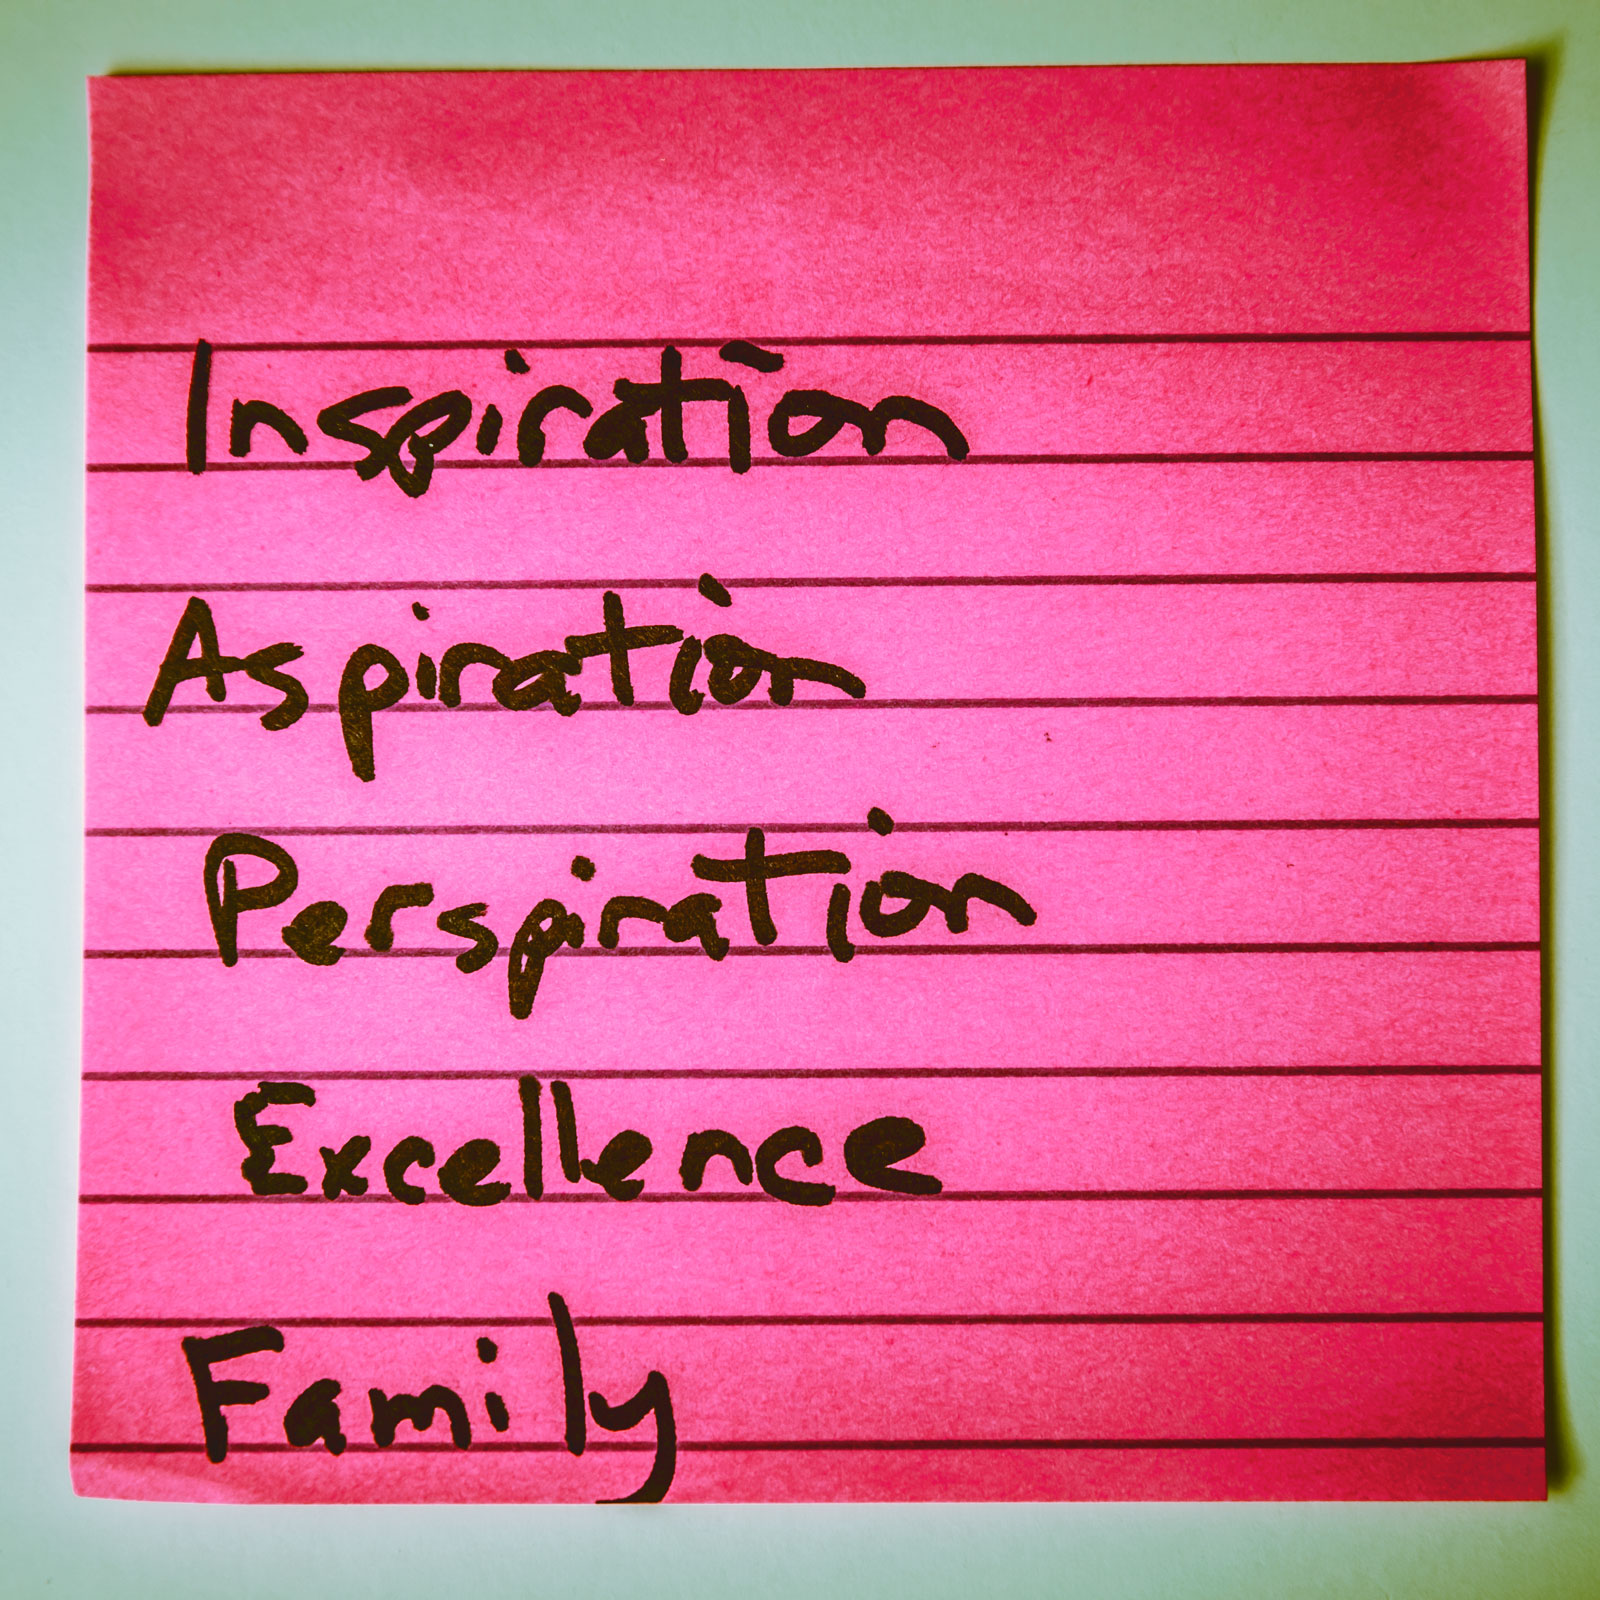 Inspiration aspiration perspiration excellence family